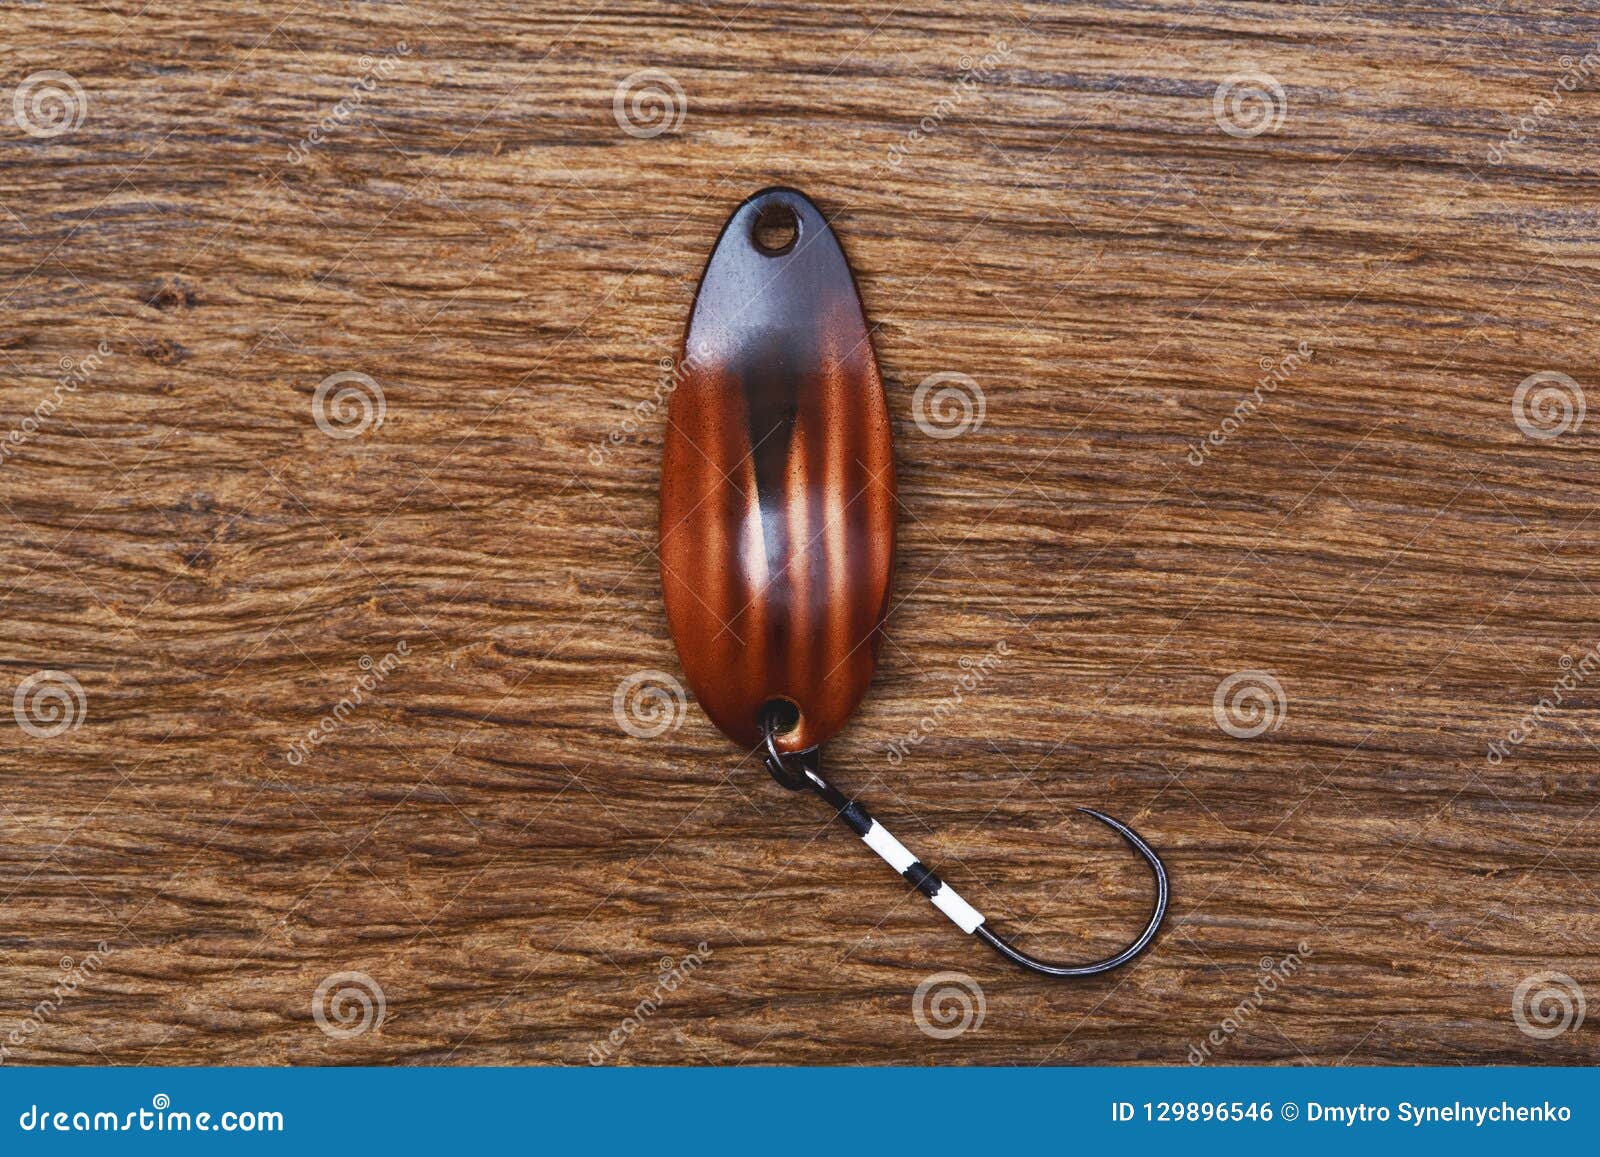 Handmade Fishing Lure on the Old Wooden Table. Stock Photo - Image